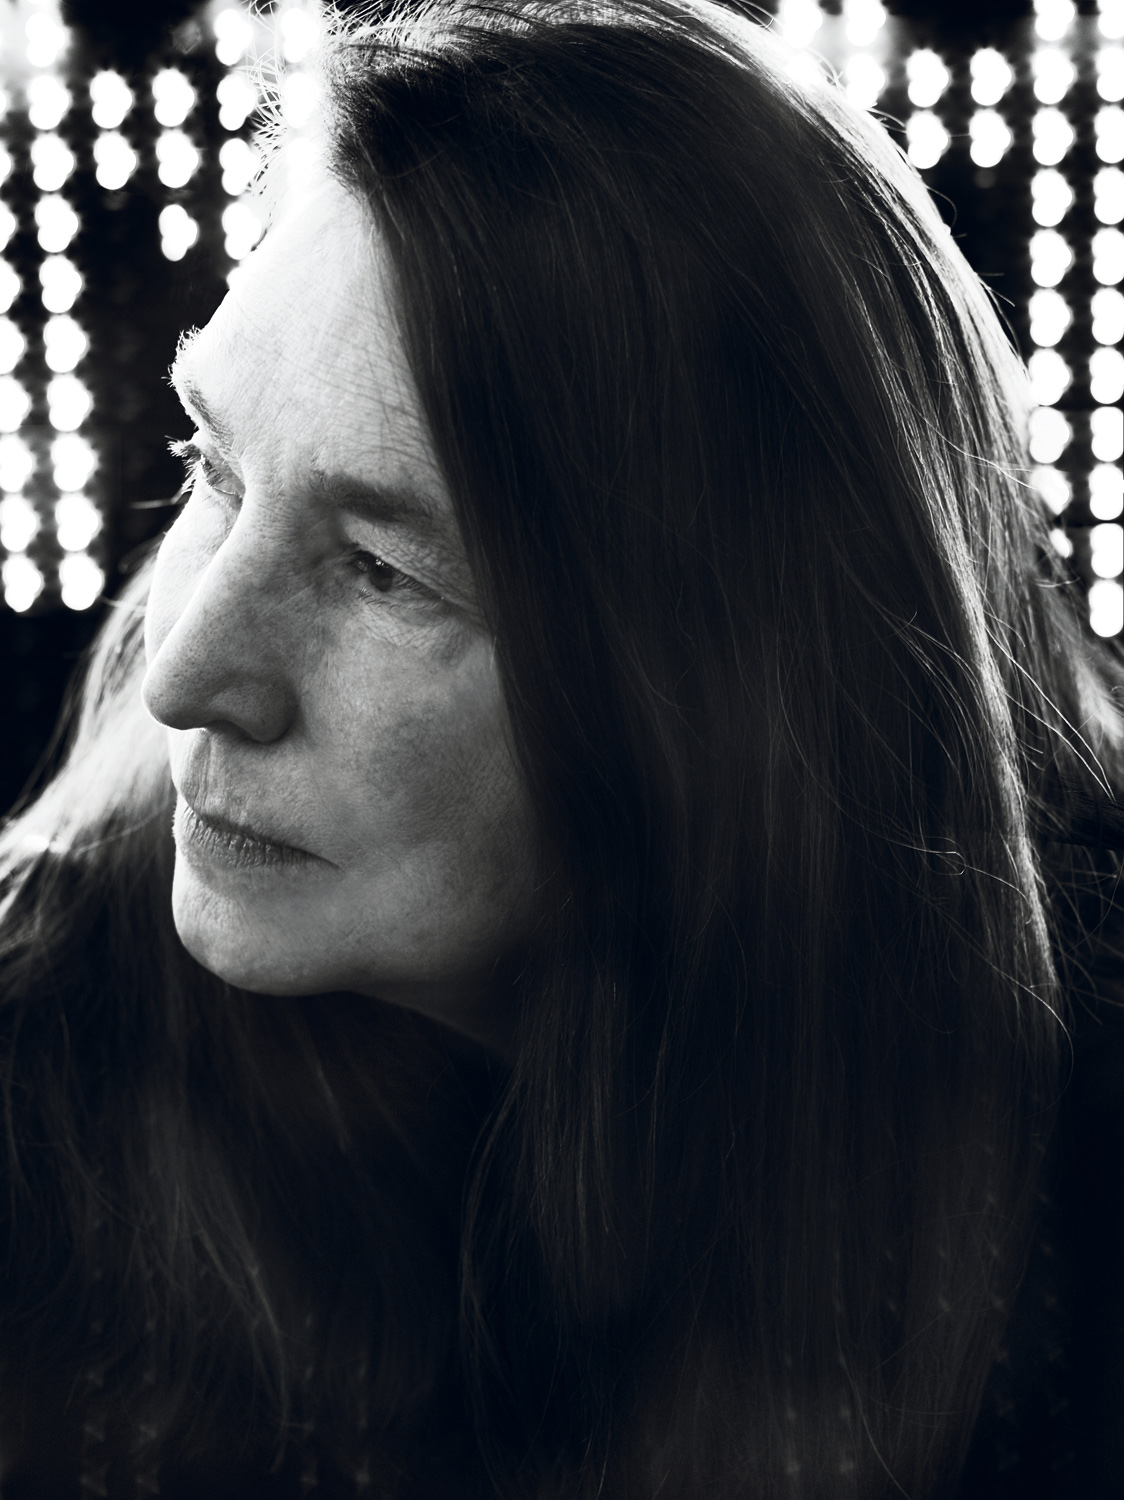 At Home With Jenny Holzer, the Artist - The New York Times